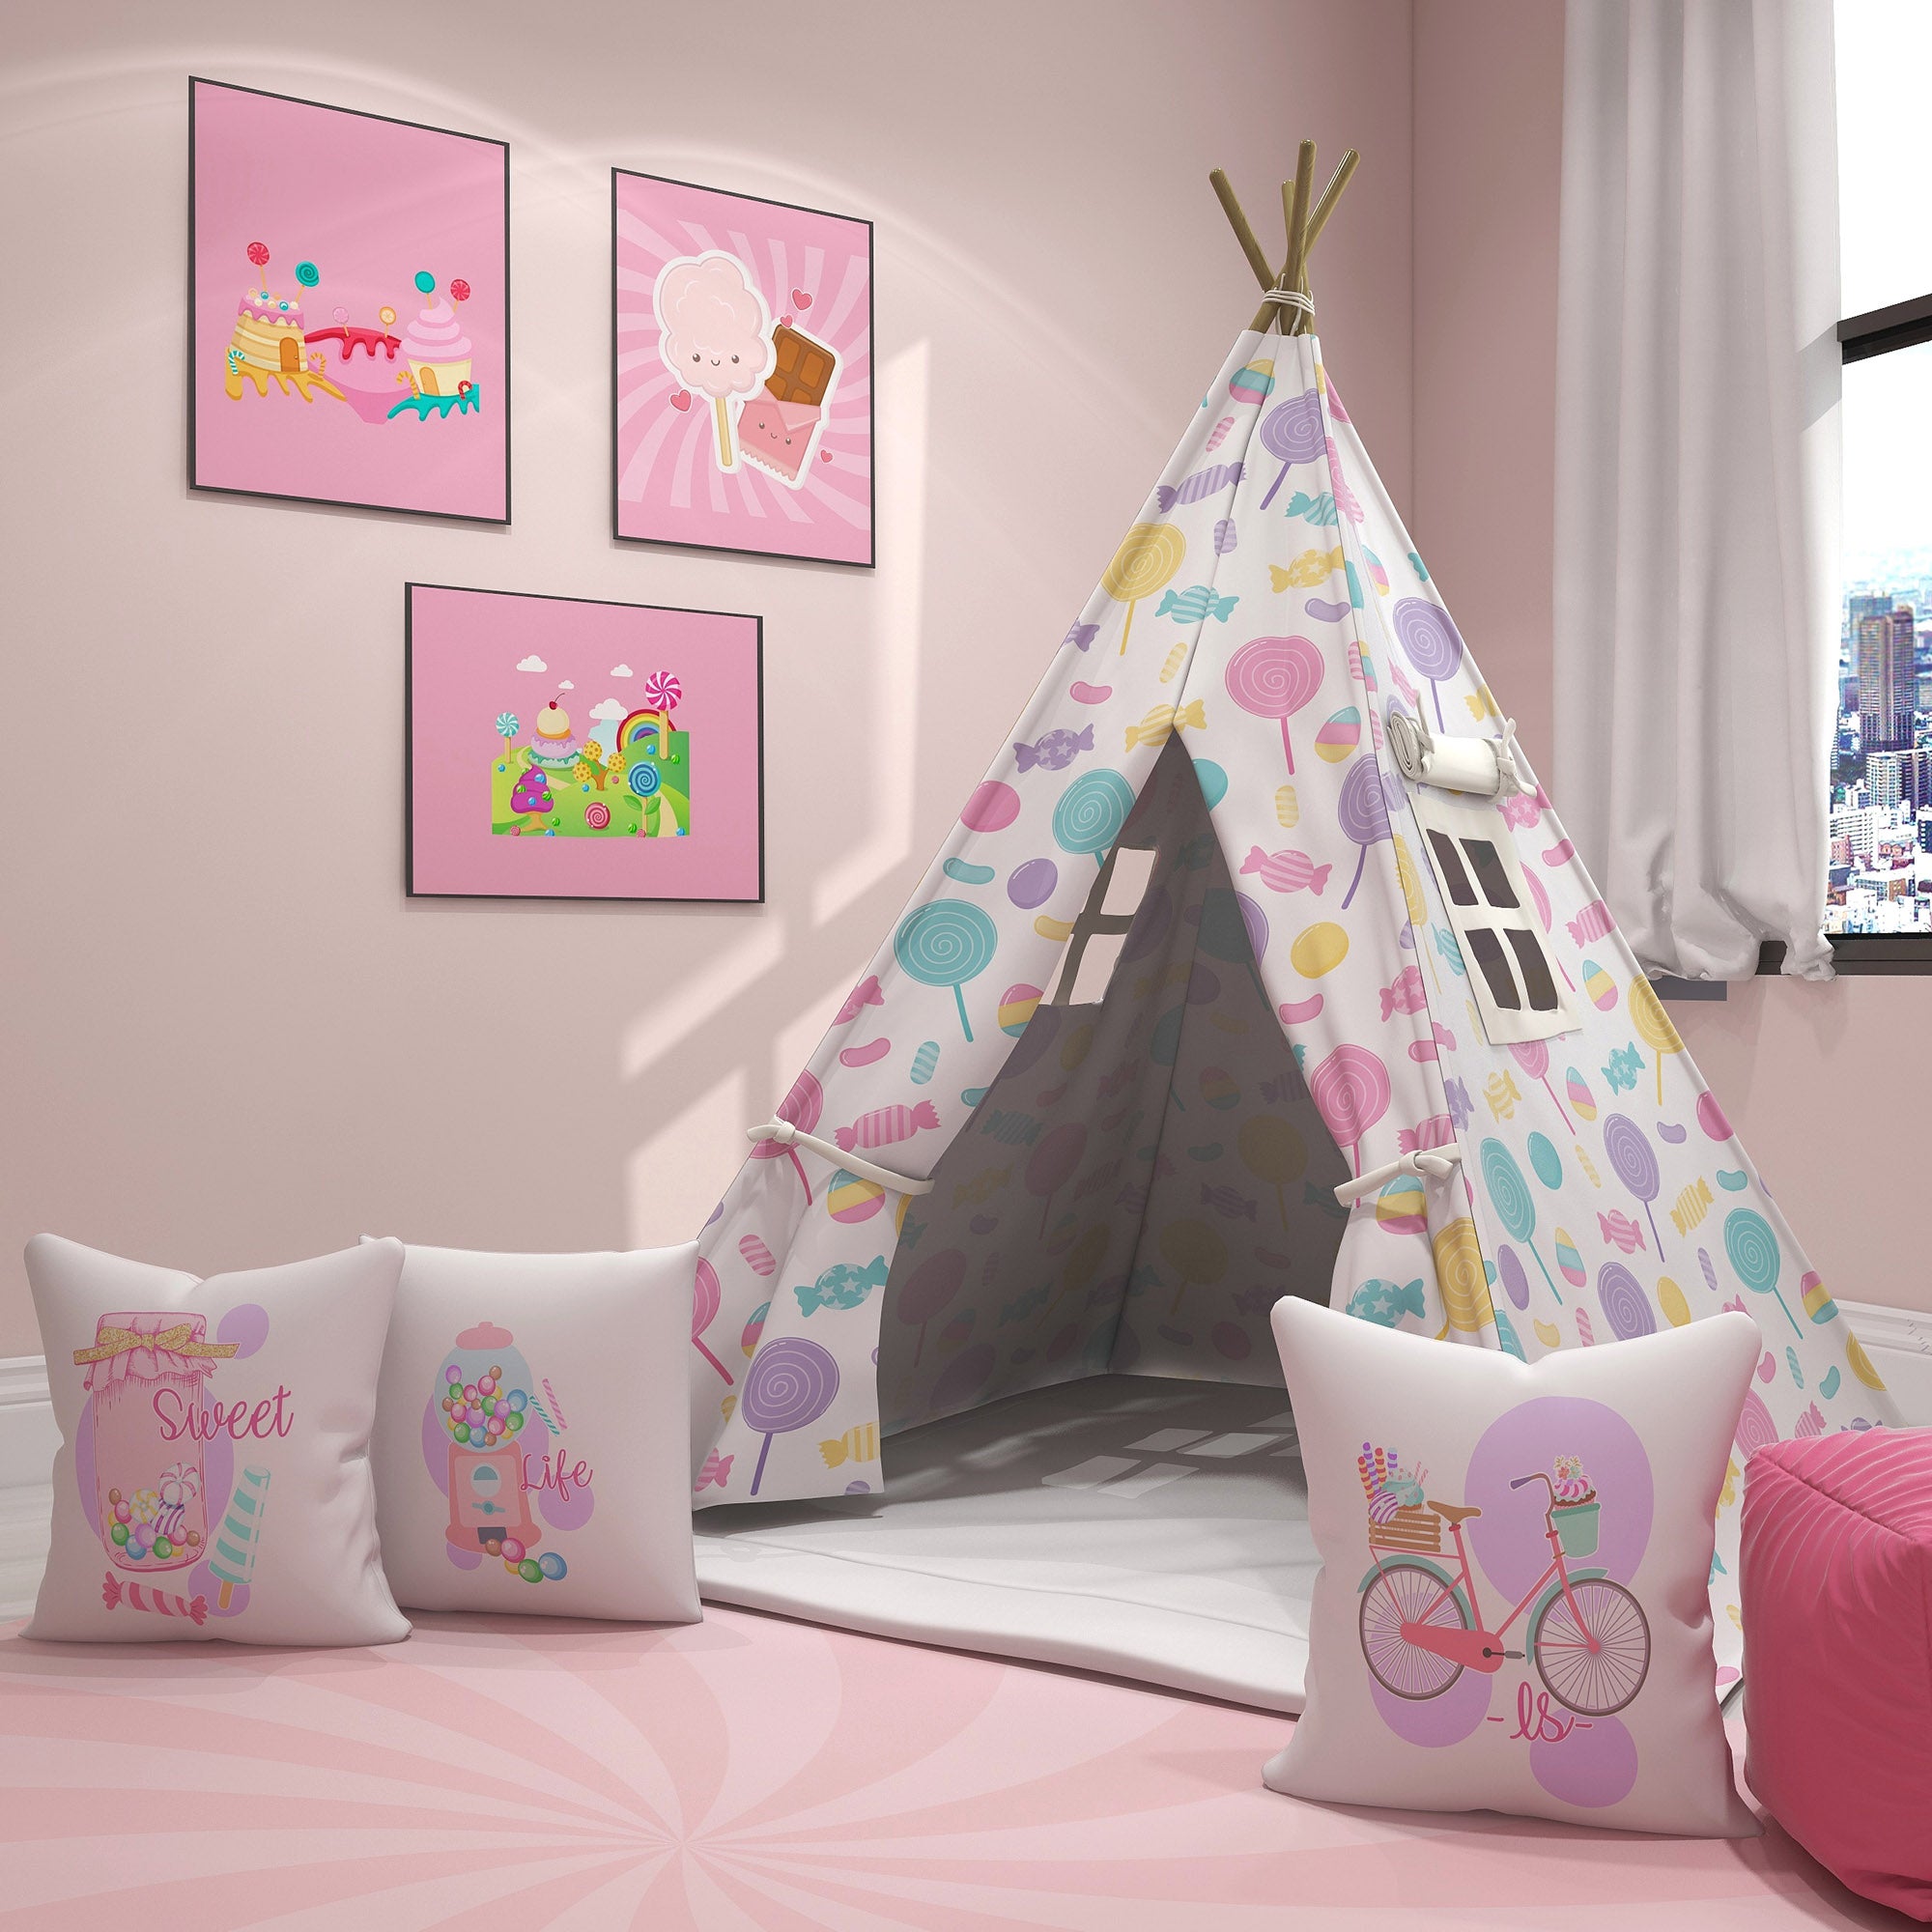 This room looks like candy.I like it so much | Gallery posted by Mengjing  home | Lemon8